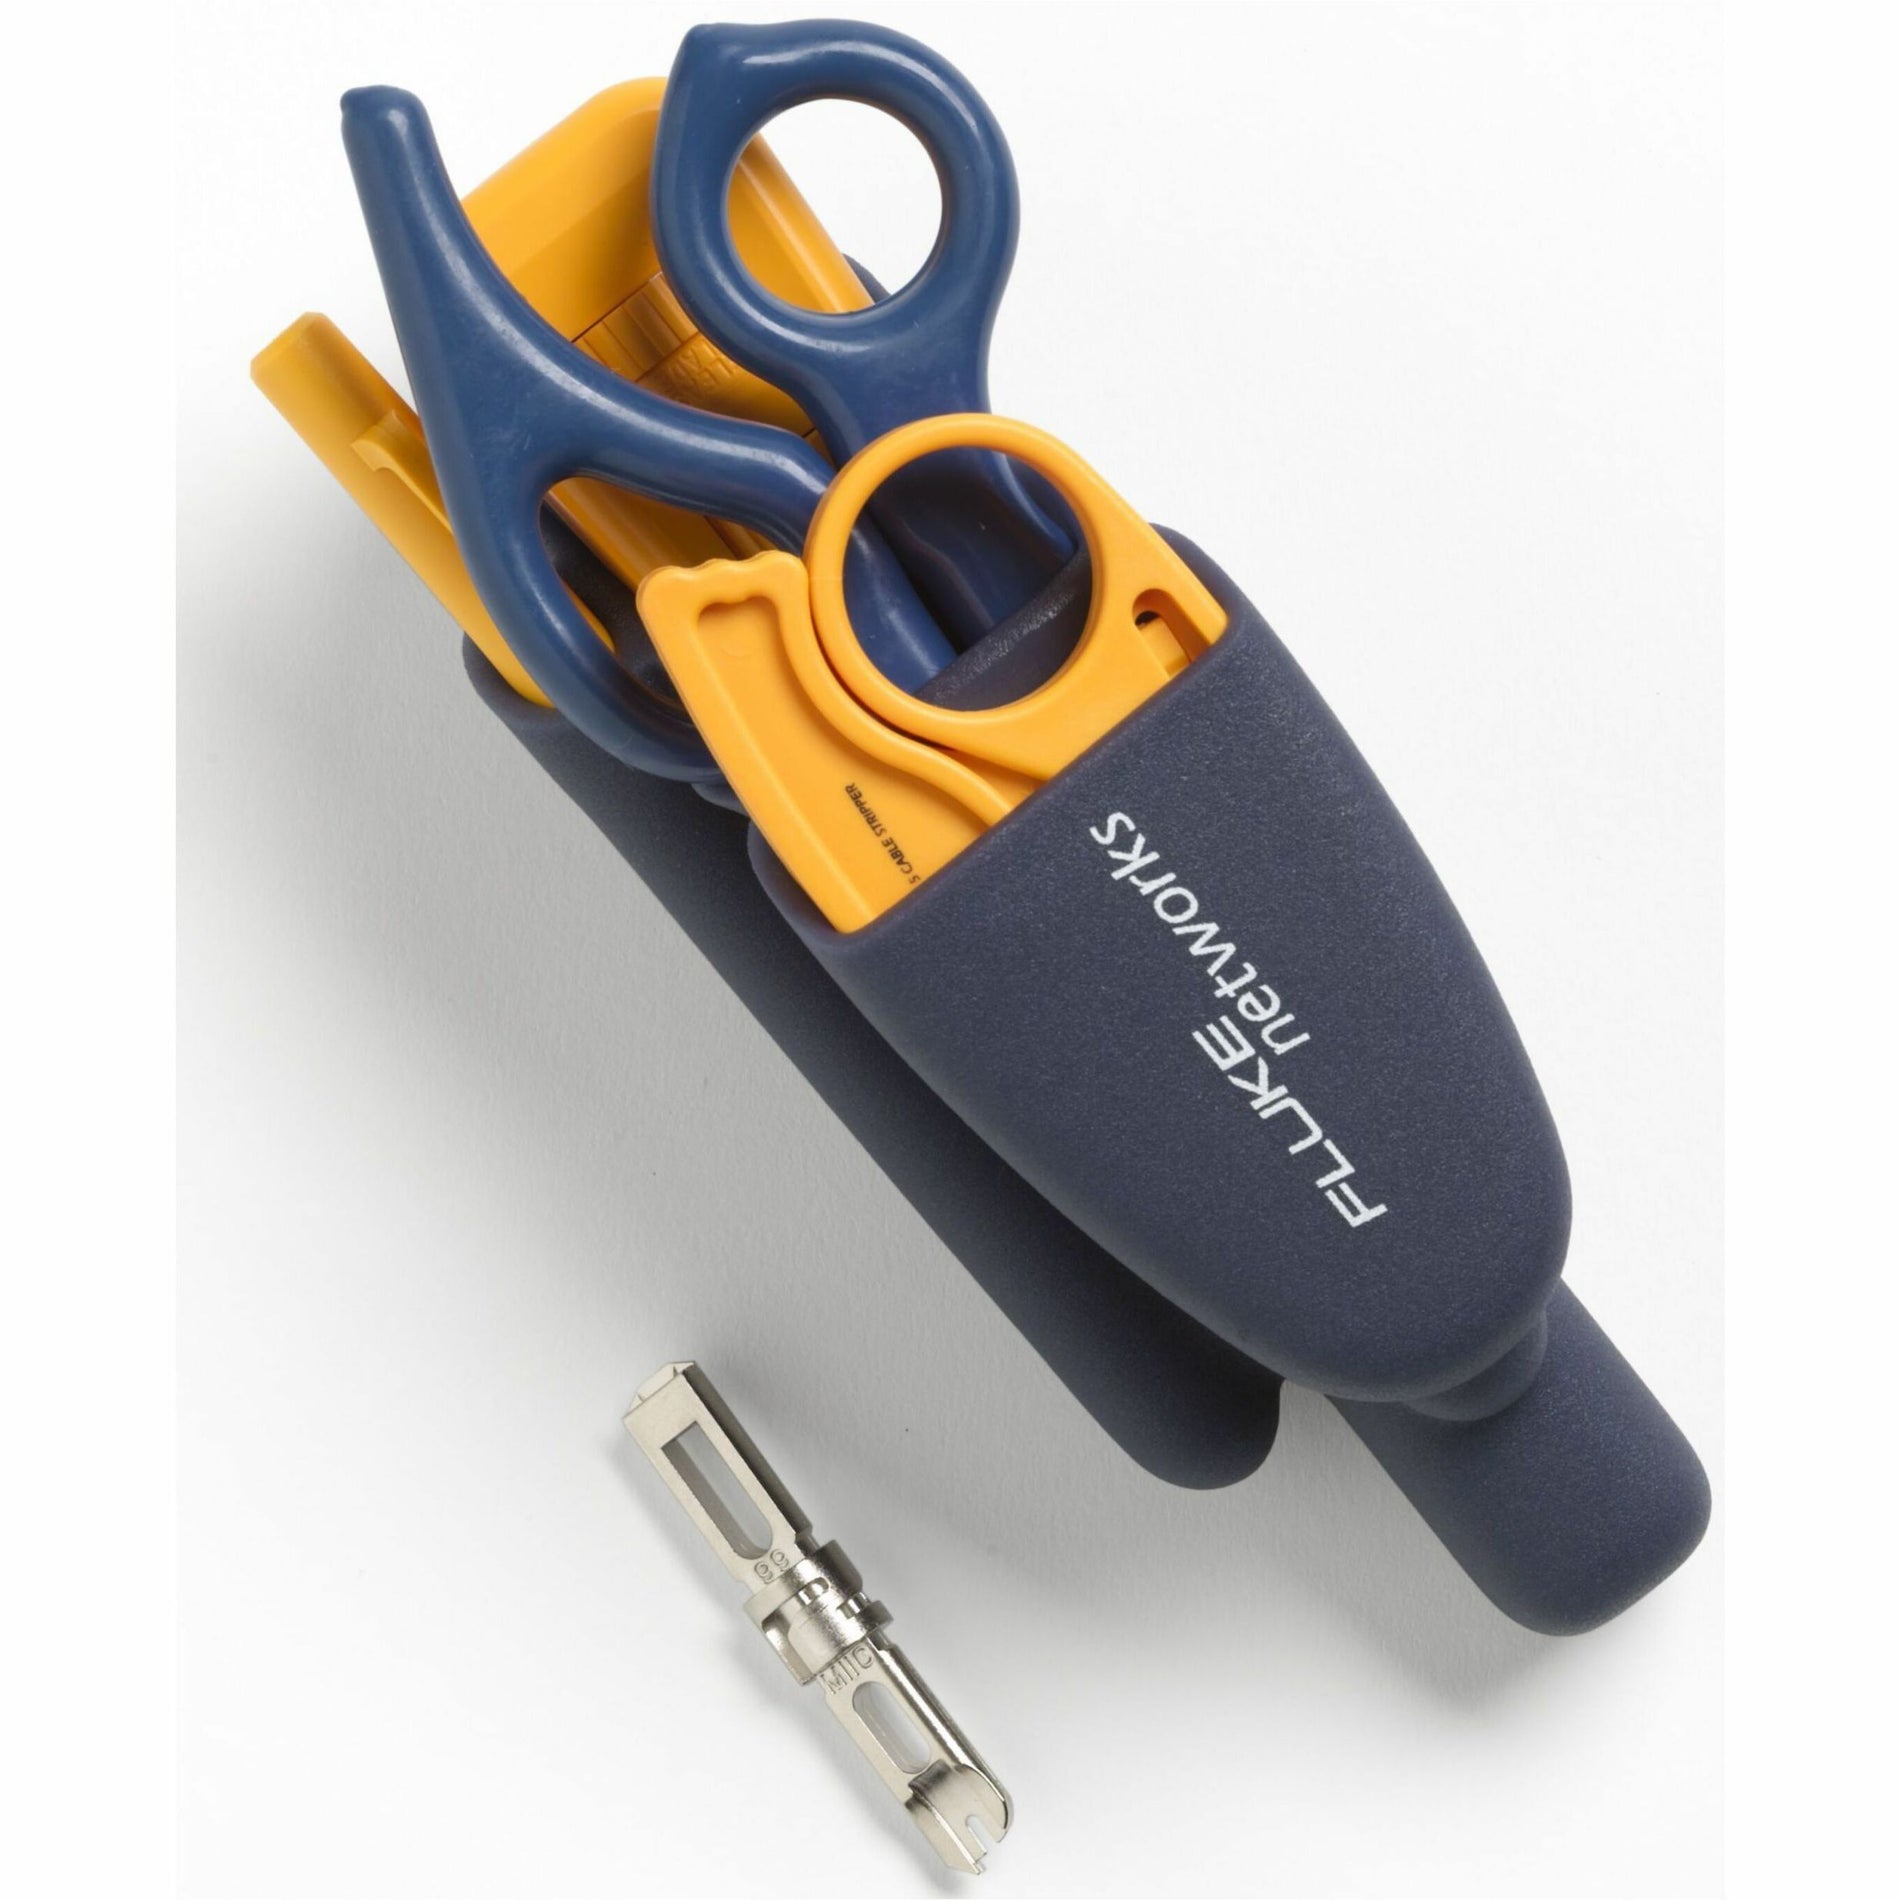 Fluke Networks 11291000 IS40 ProTool Kit, D814 Impact Tool, Electricians D-Snips, Cable Stripper, EverSharp 66 / 110 Cut Blade, Probe Pic, Carrying case